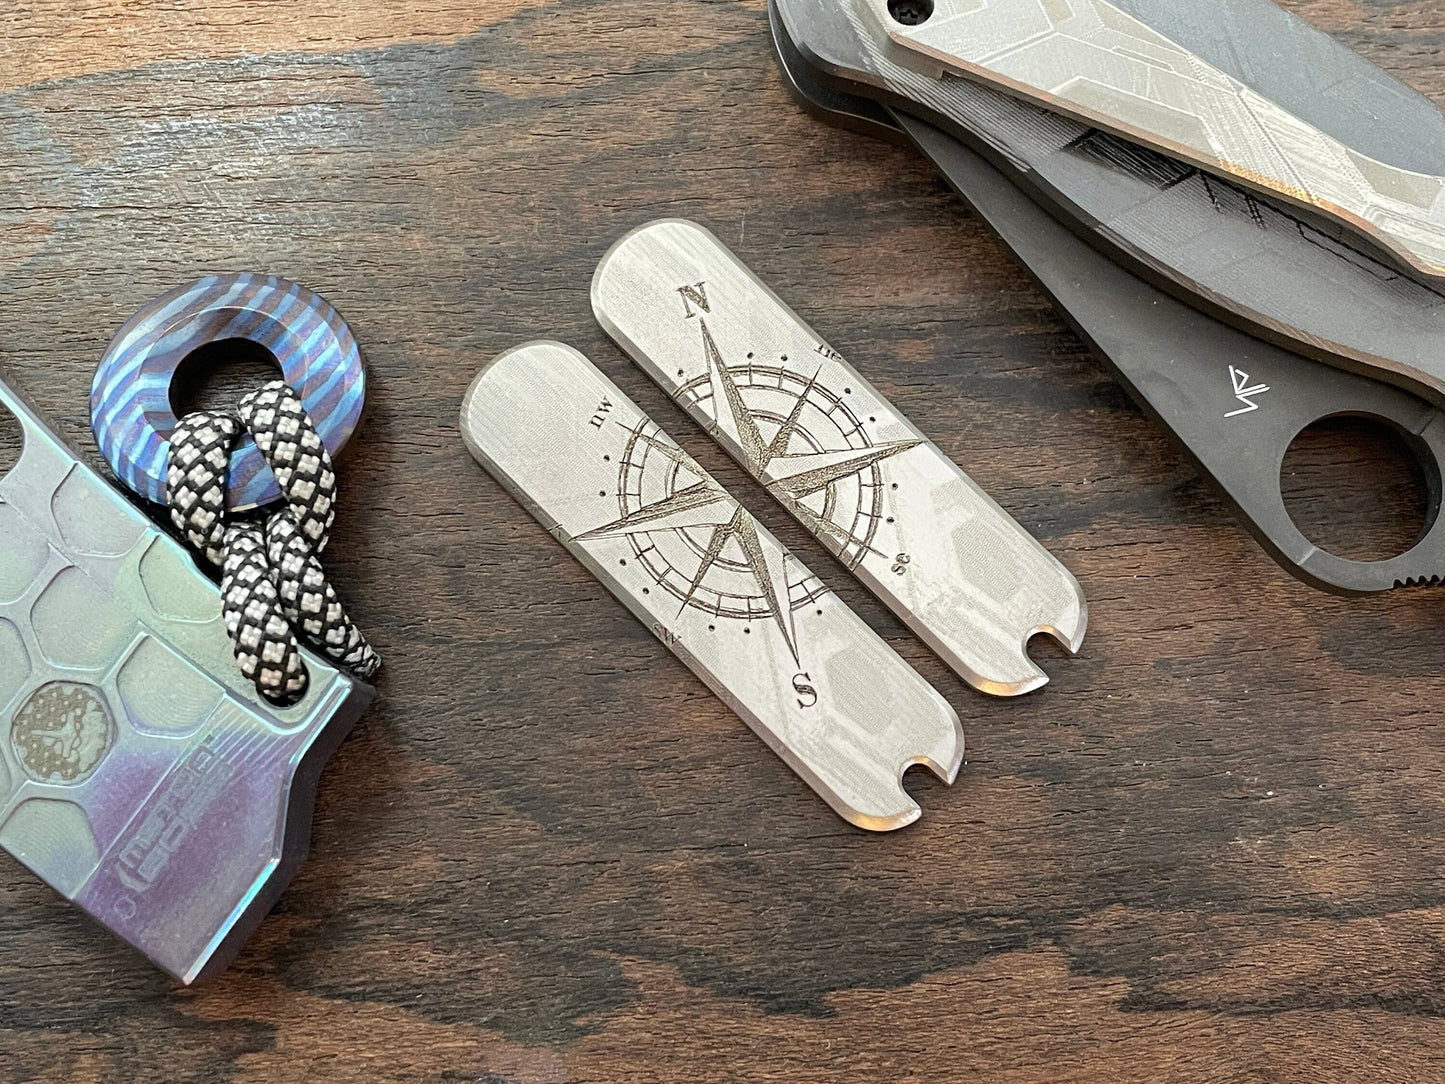 COMPASS engraved 58mm Titanium Scales for Swiss Army SAK